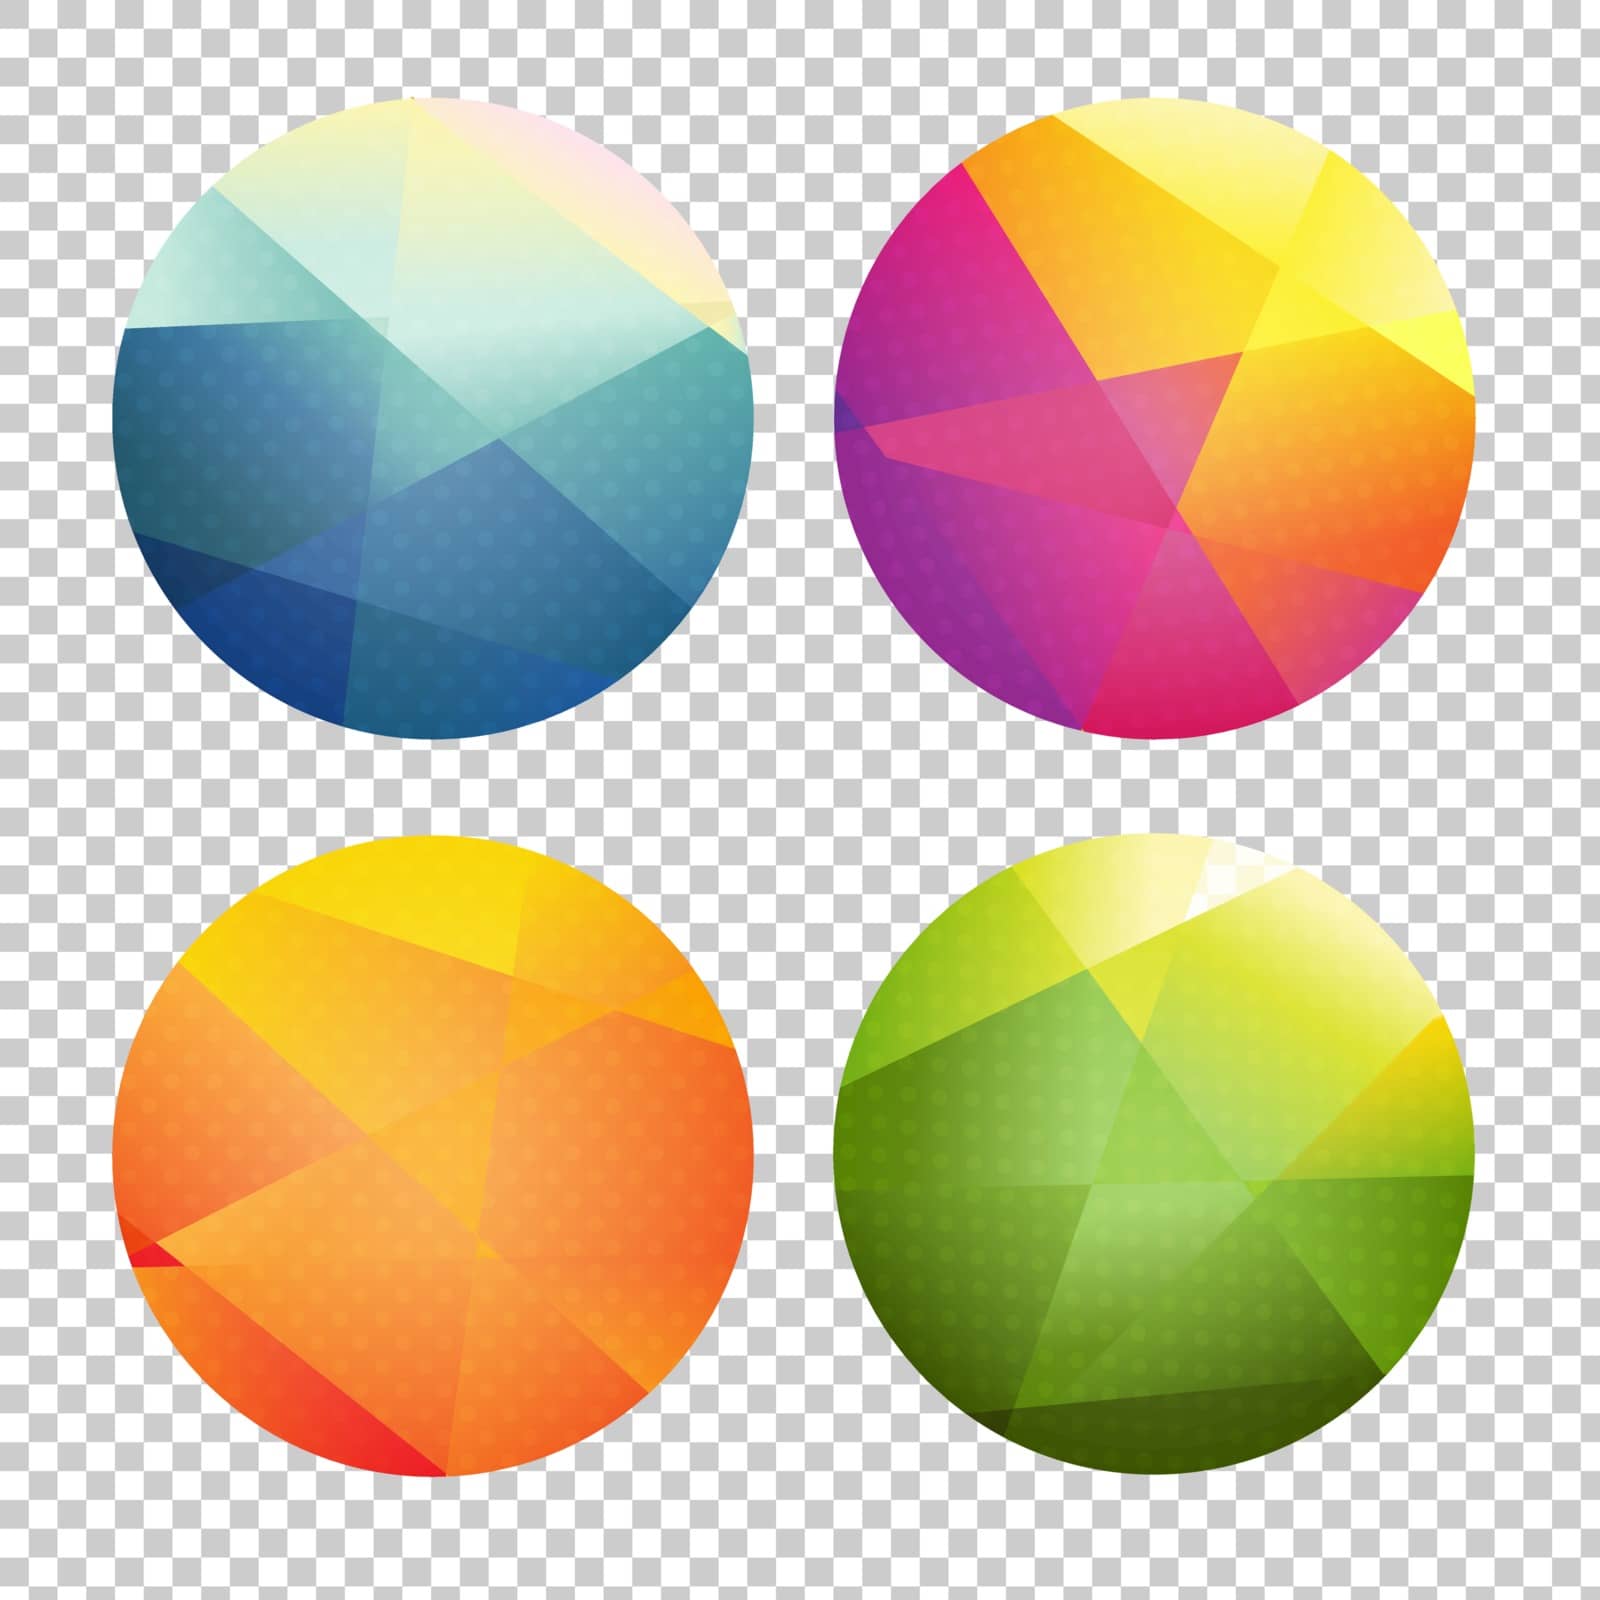 Set Of Color Origami Spheres by barbaliss